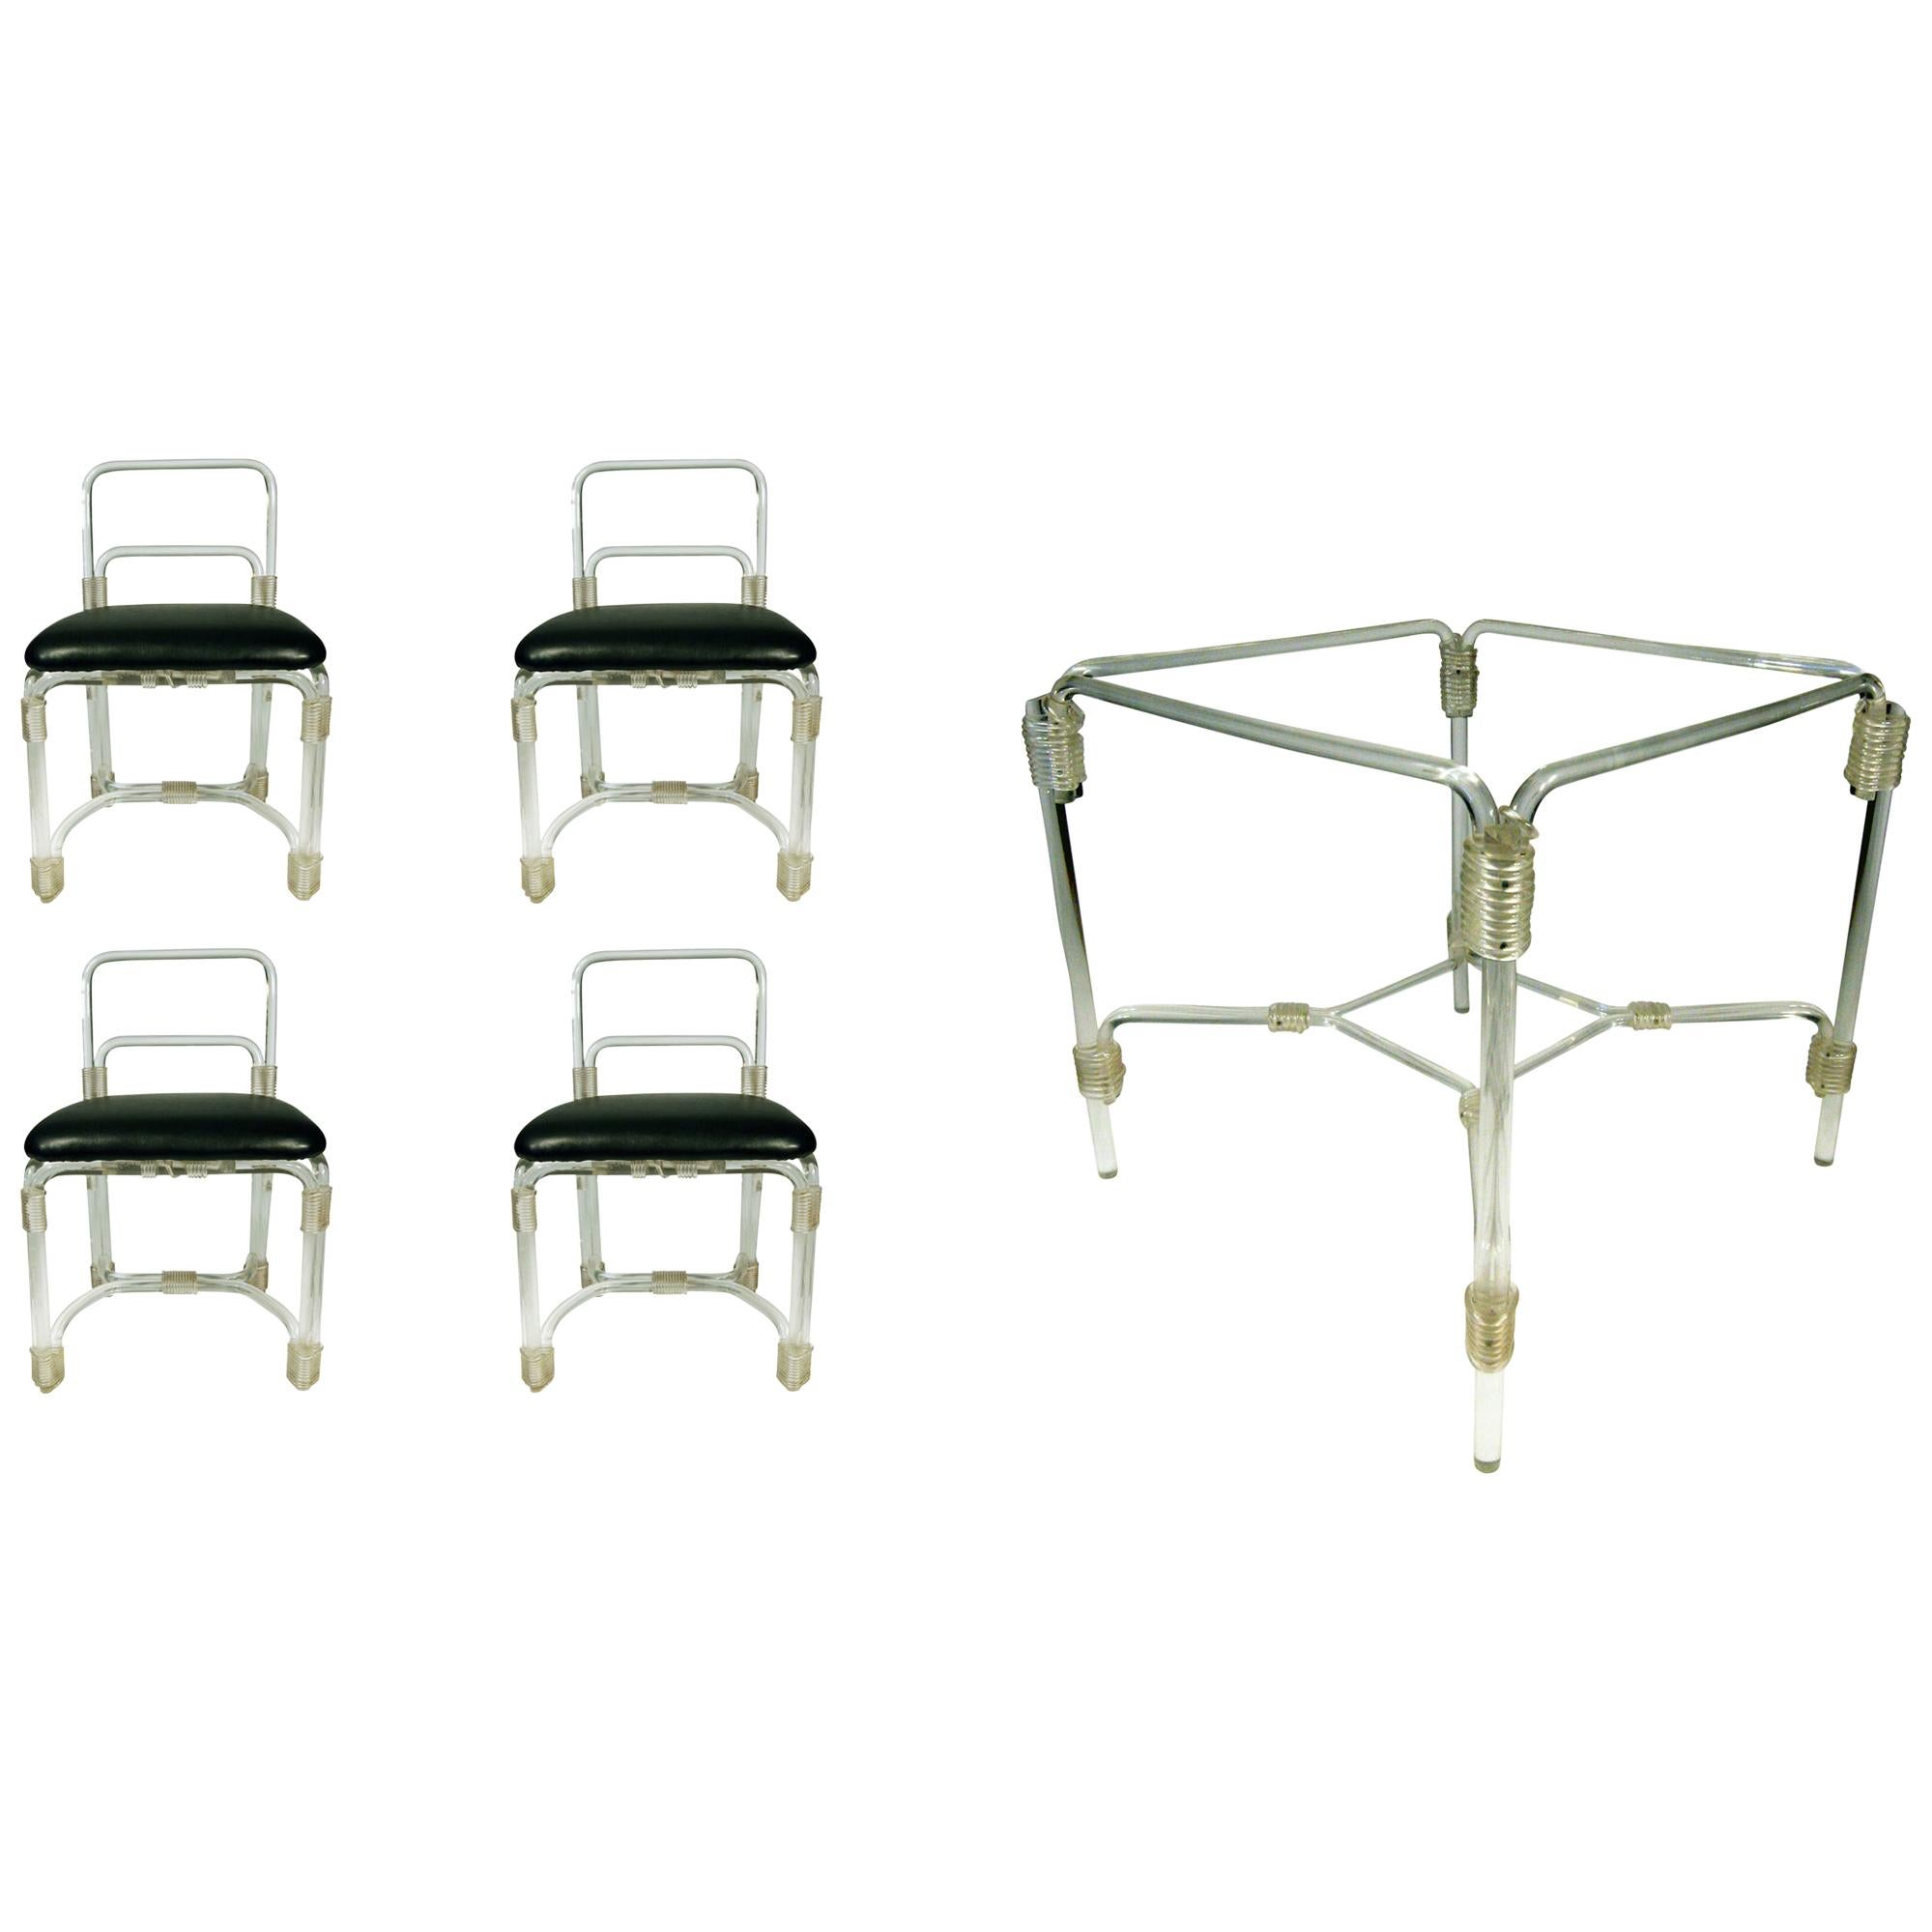 Grosfeld Lucite Dining Table with Four Chairs, circa 1940s For Sale